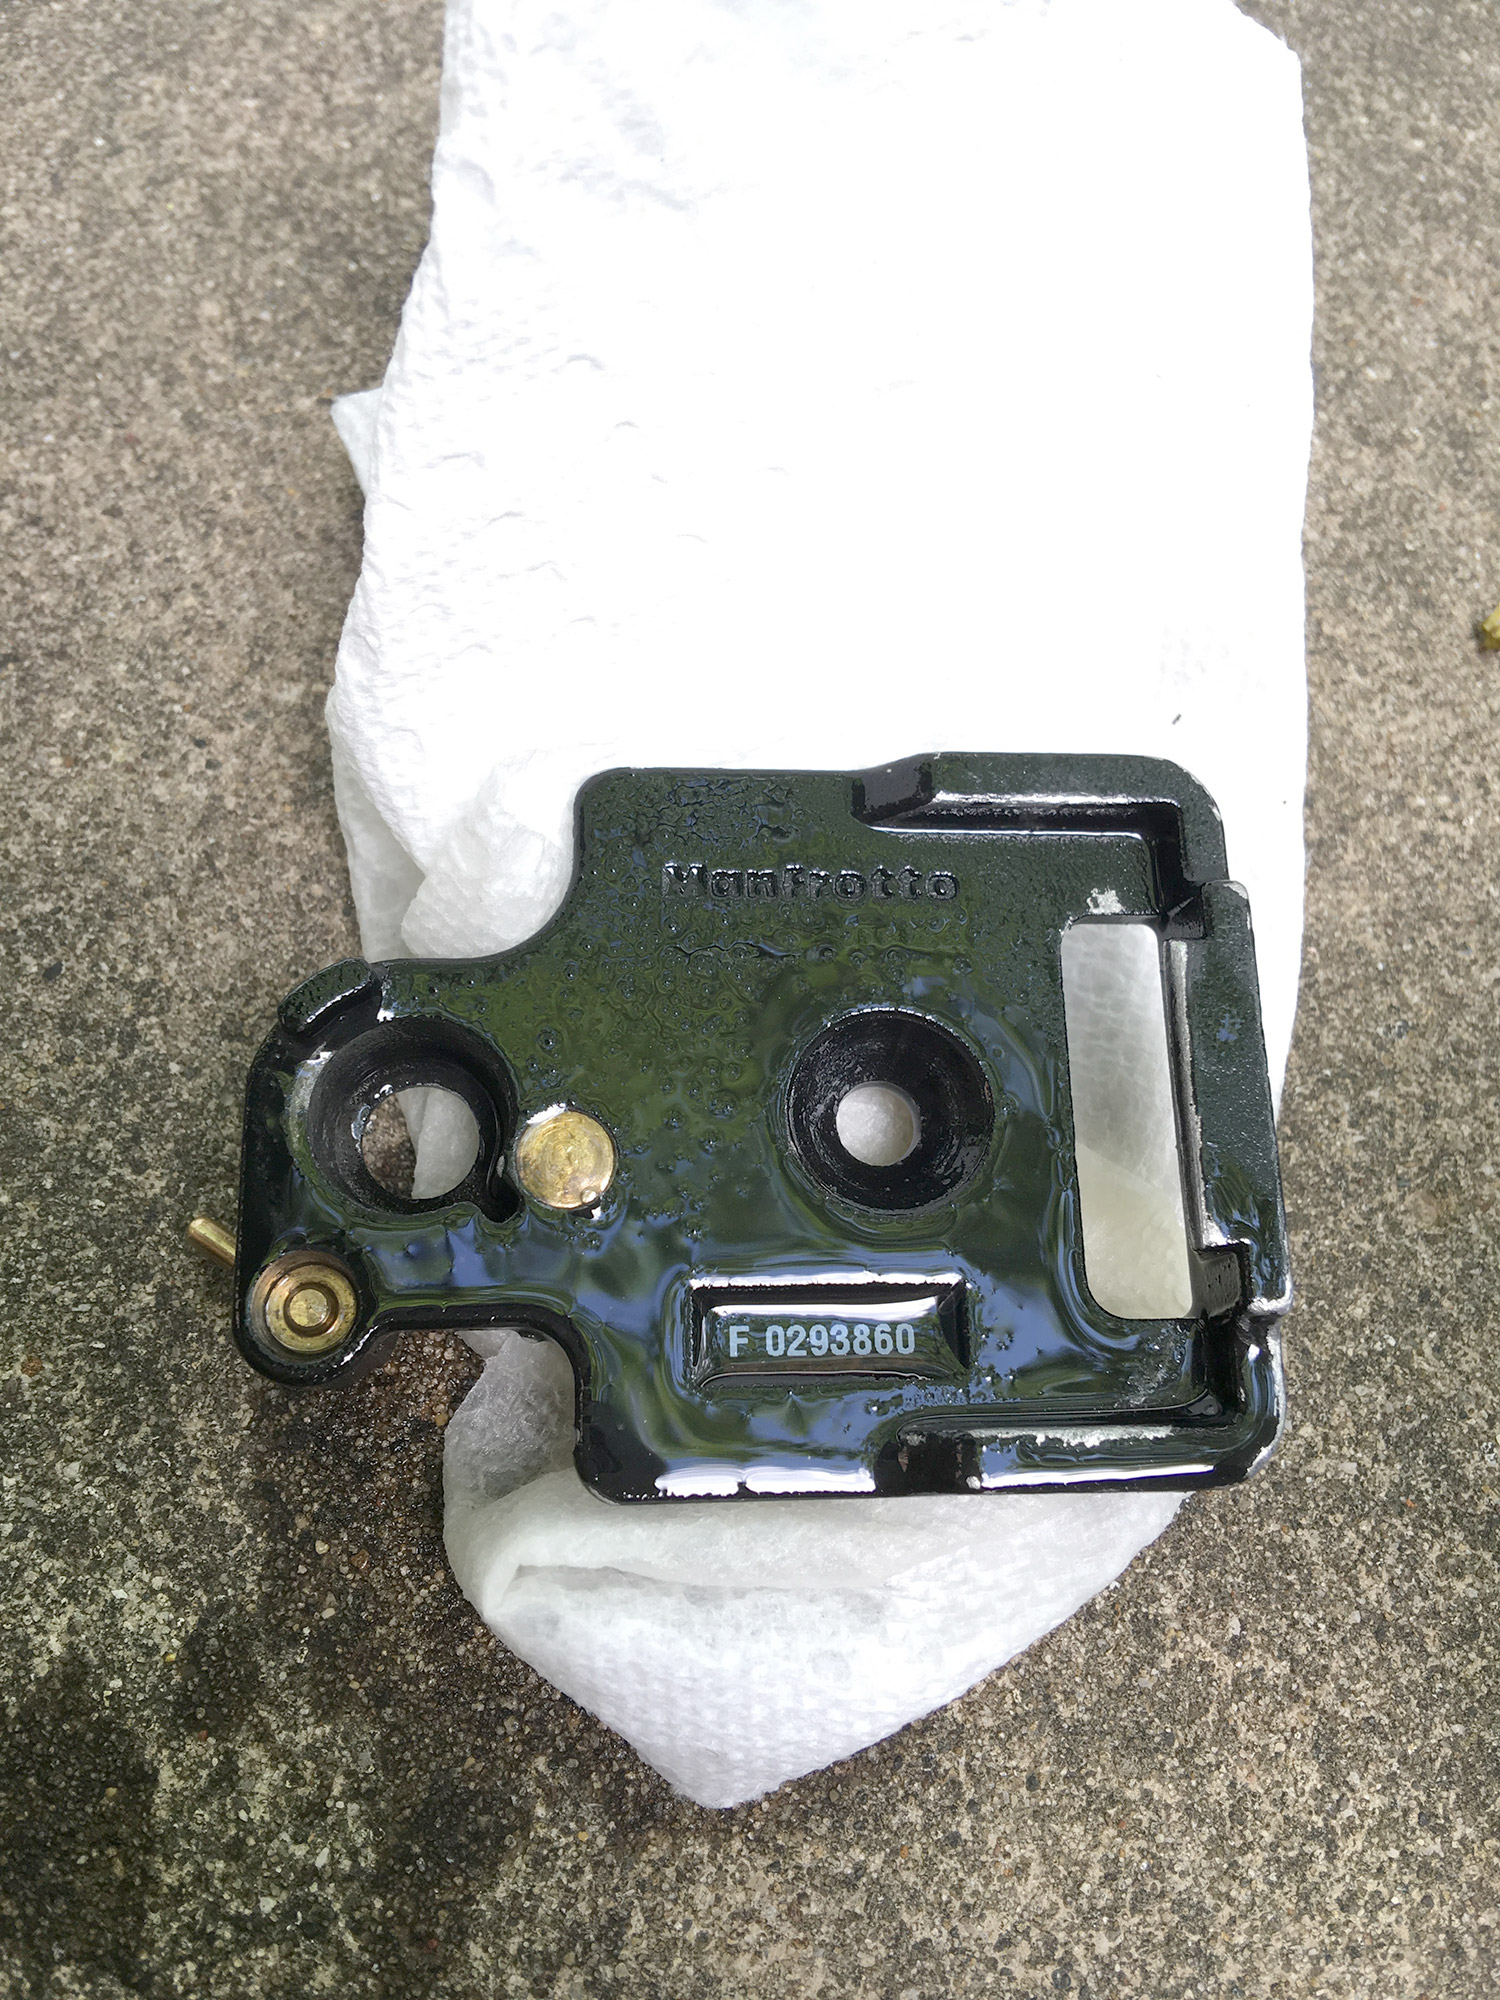 Seized tripod head base plate covered in penetrating oil